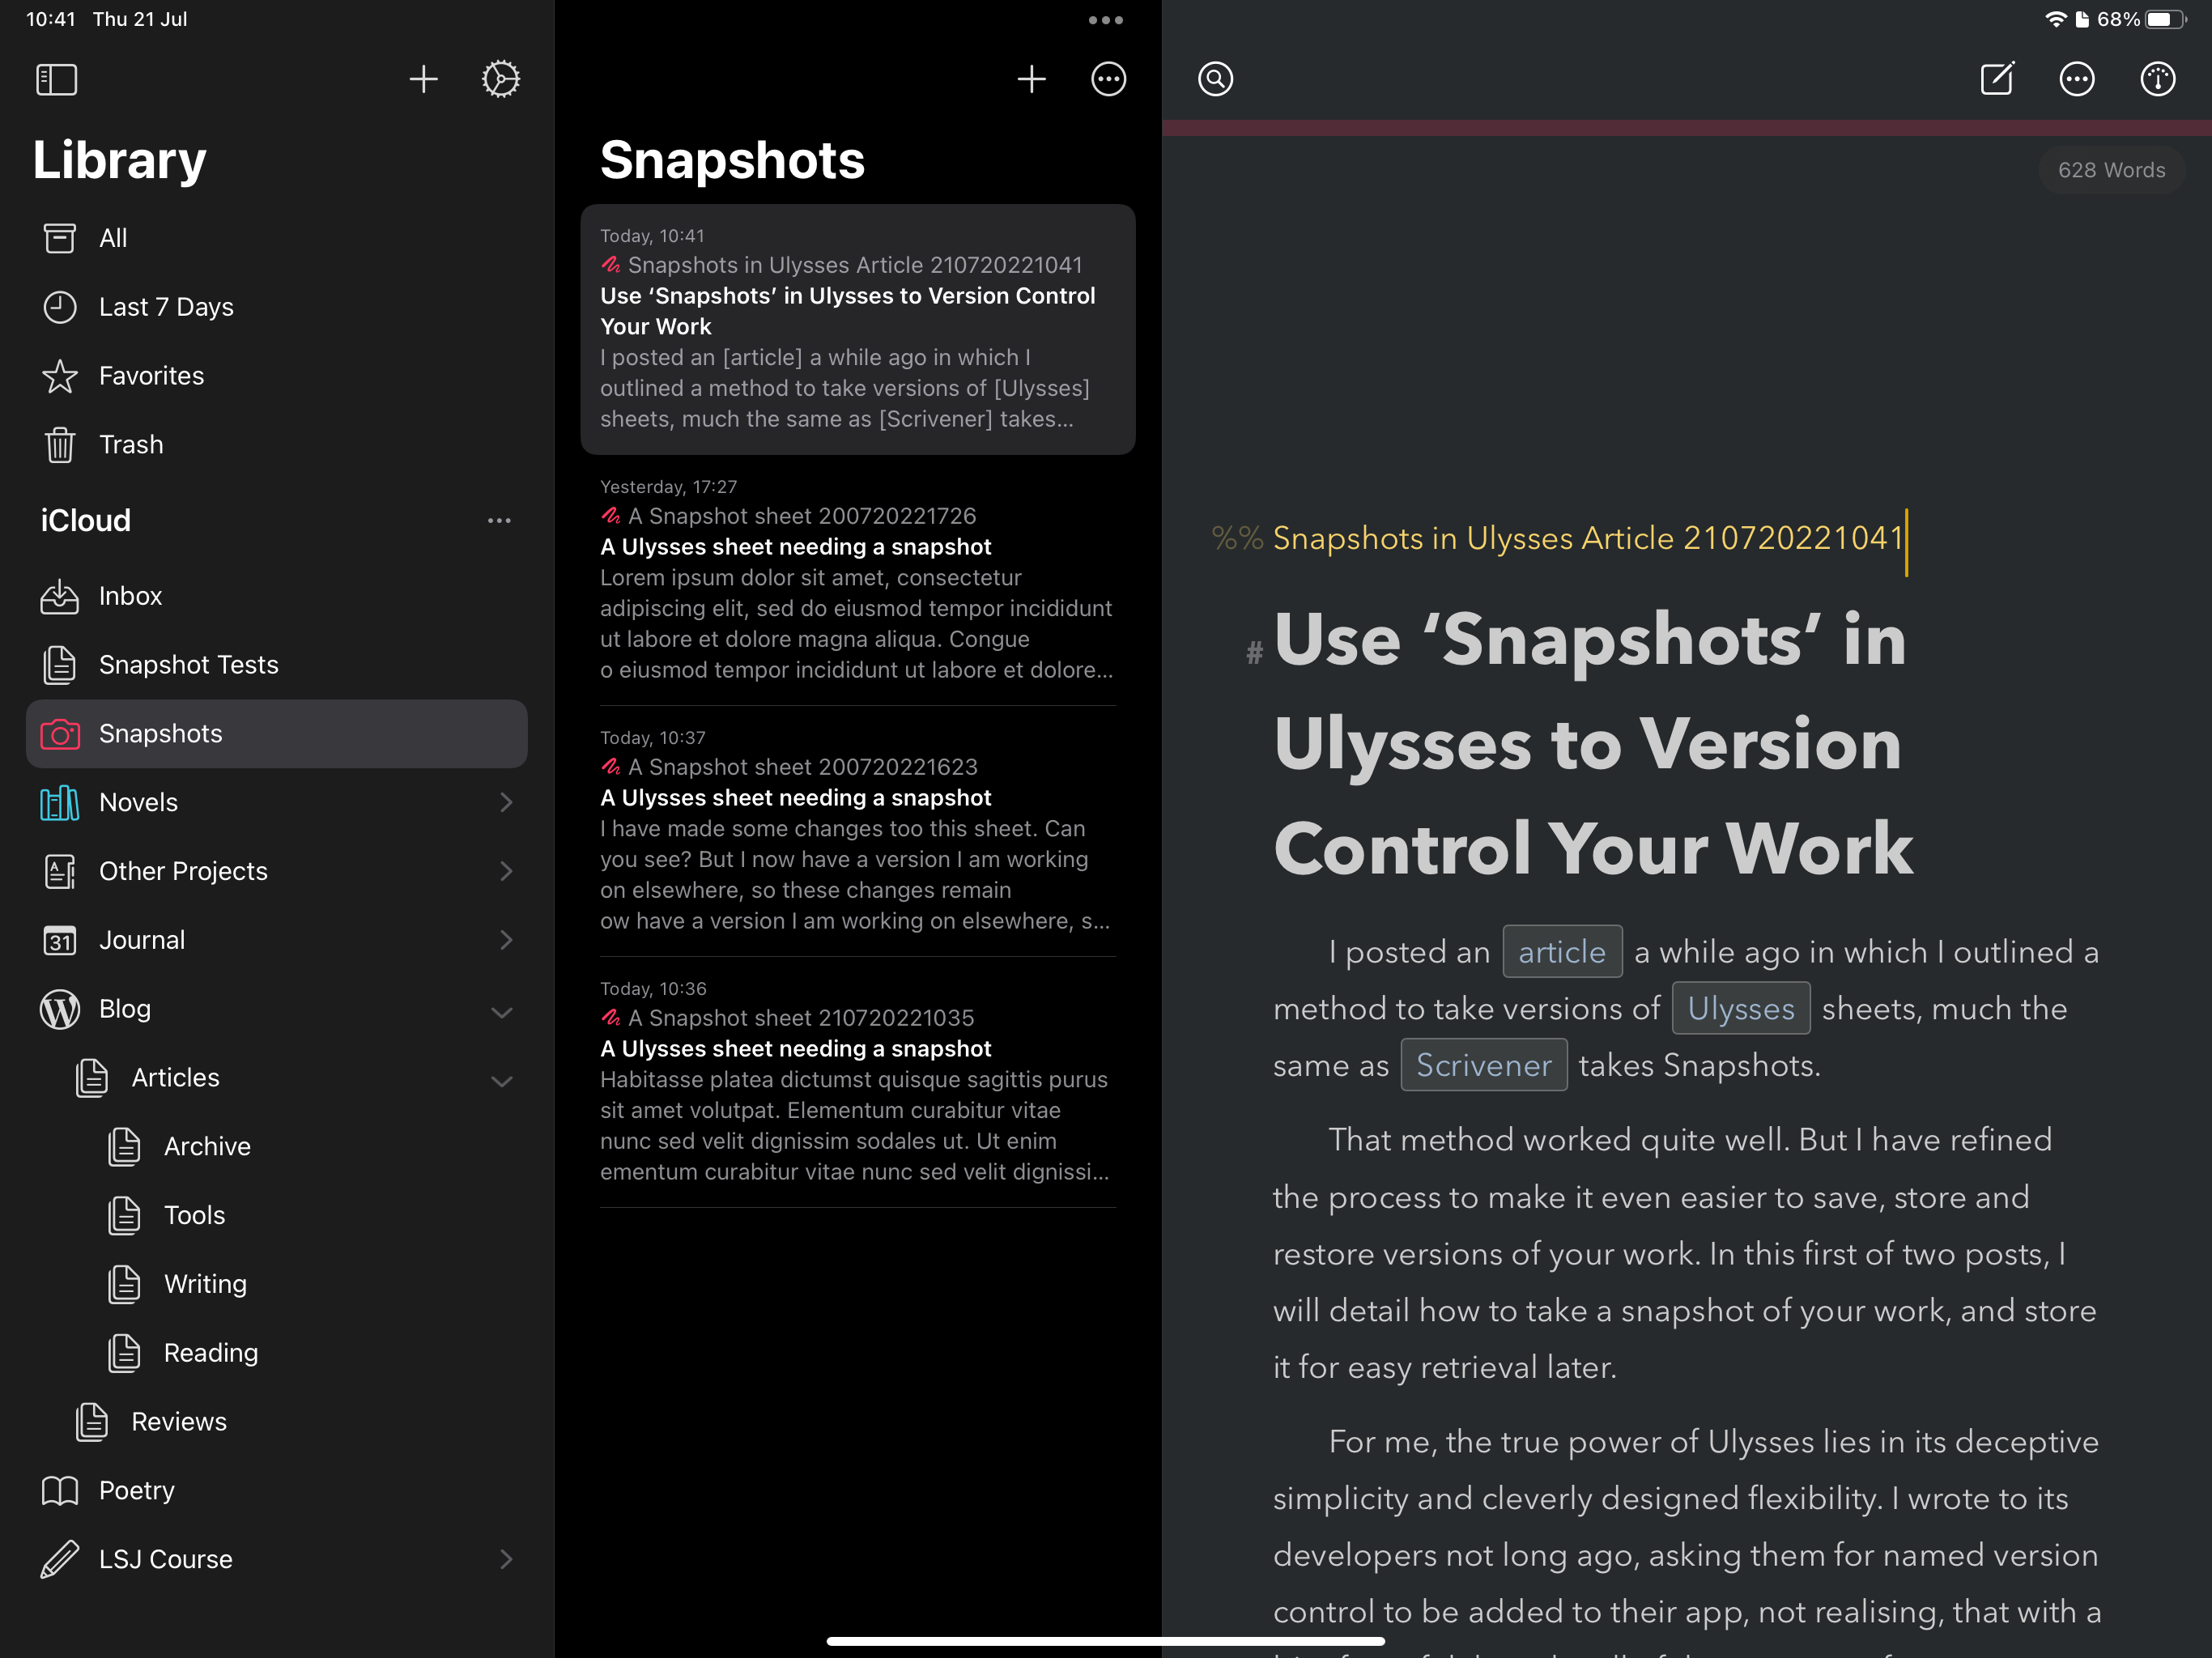 The Snapshots Library in Ulysses